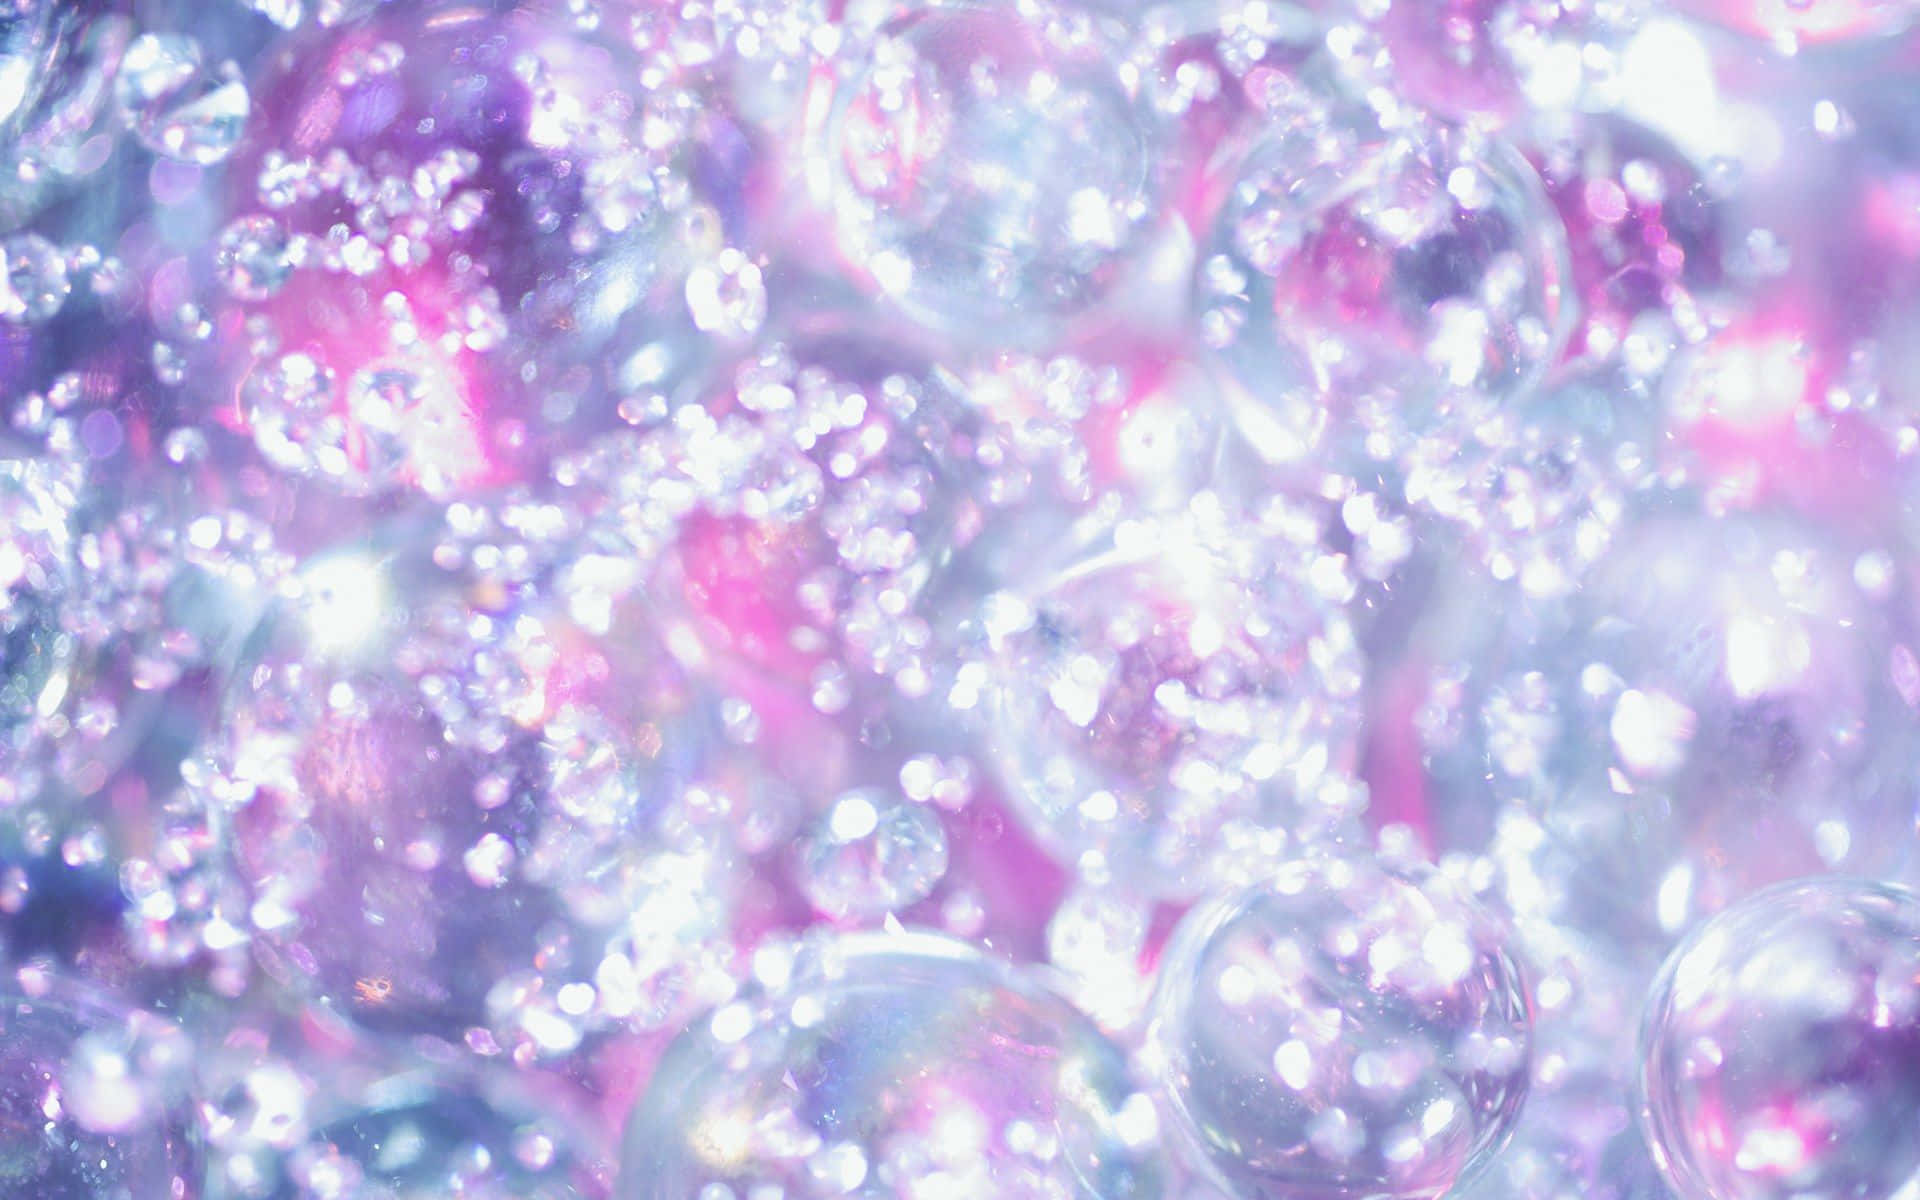 A Purple And Pink Background With Bubbles